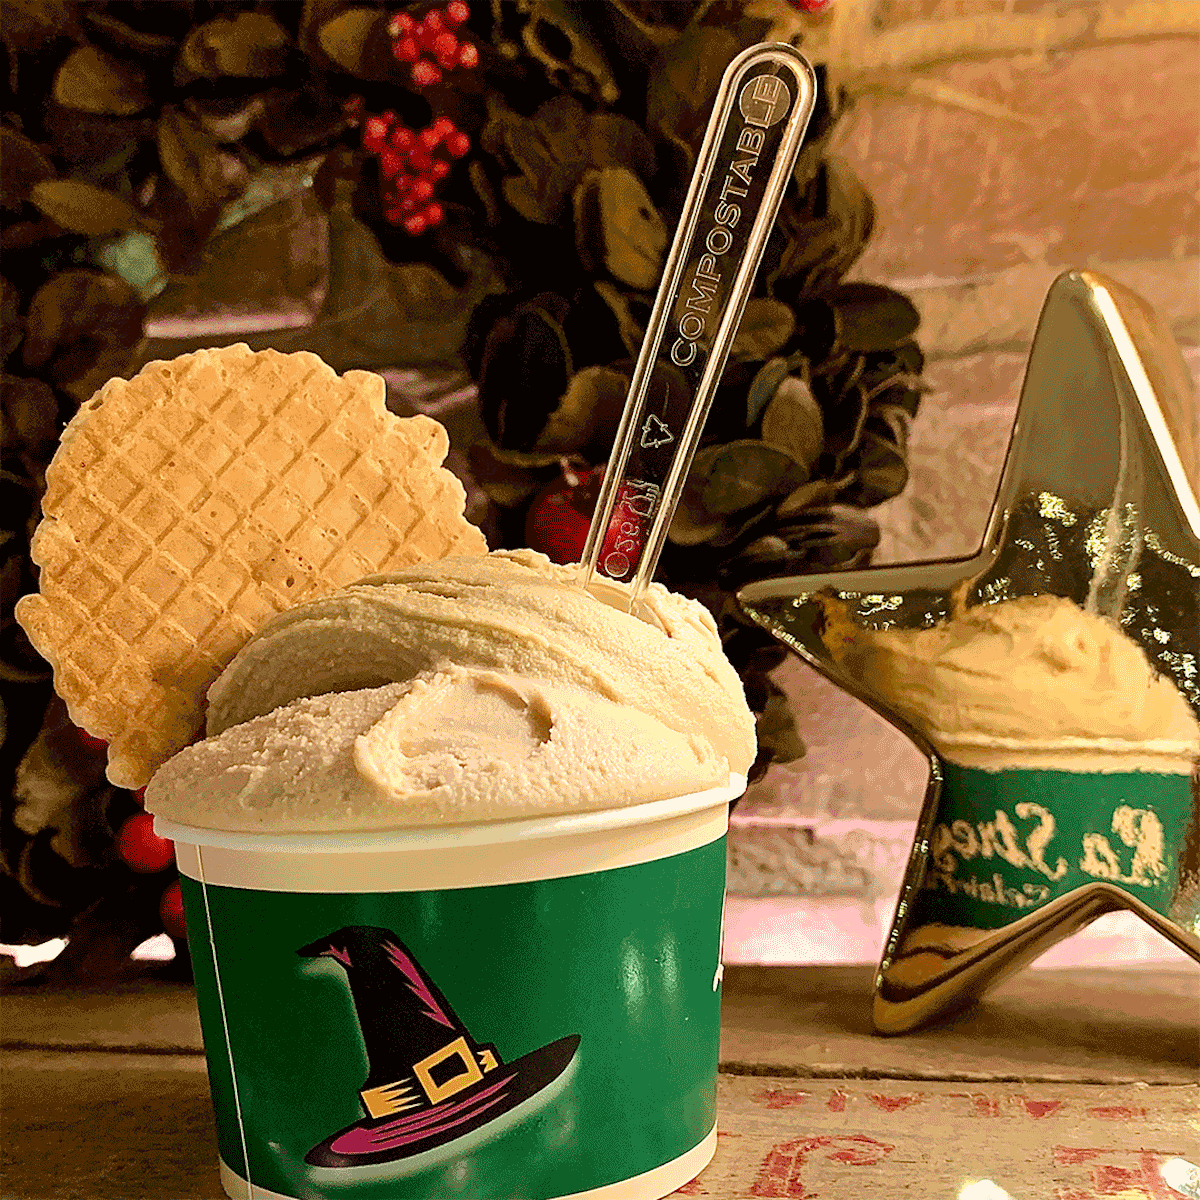 Gelato decorated with a thin cookie in a green cup with a witches' hat design.